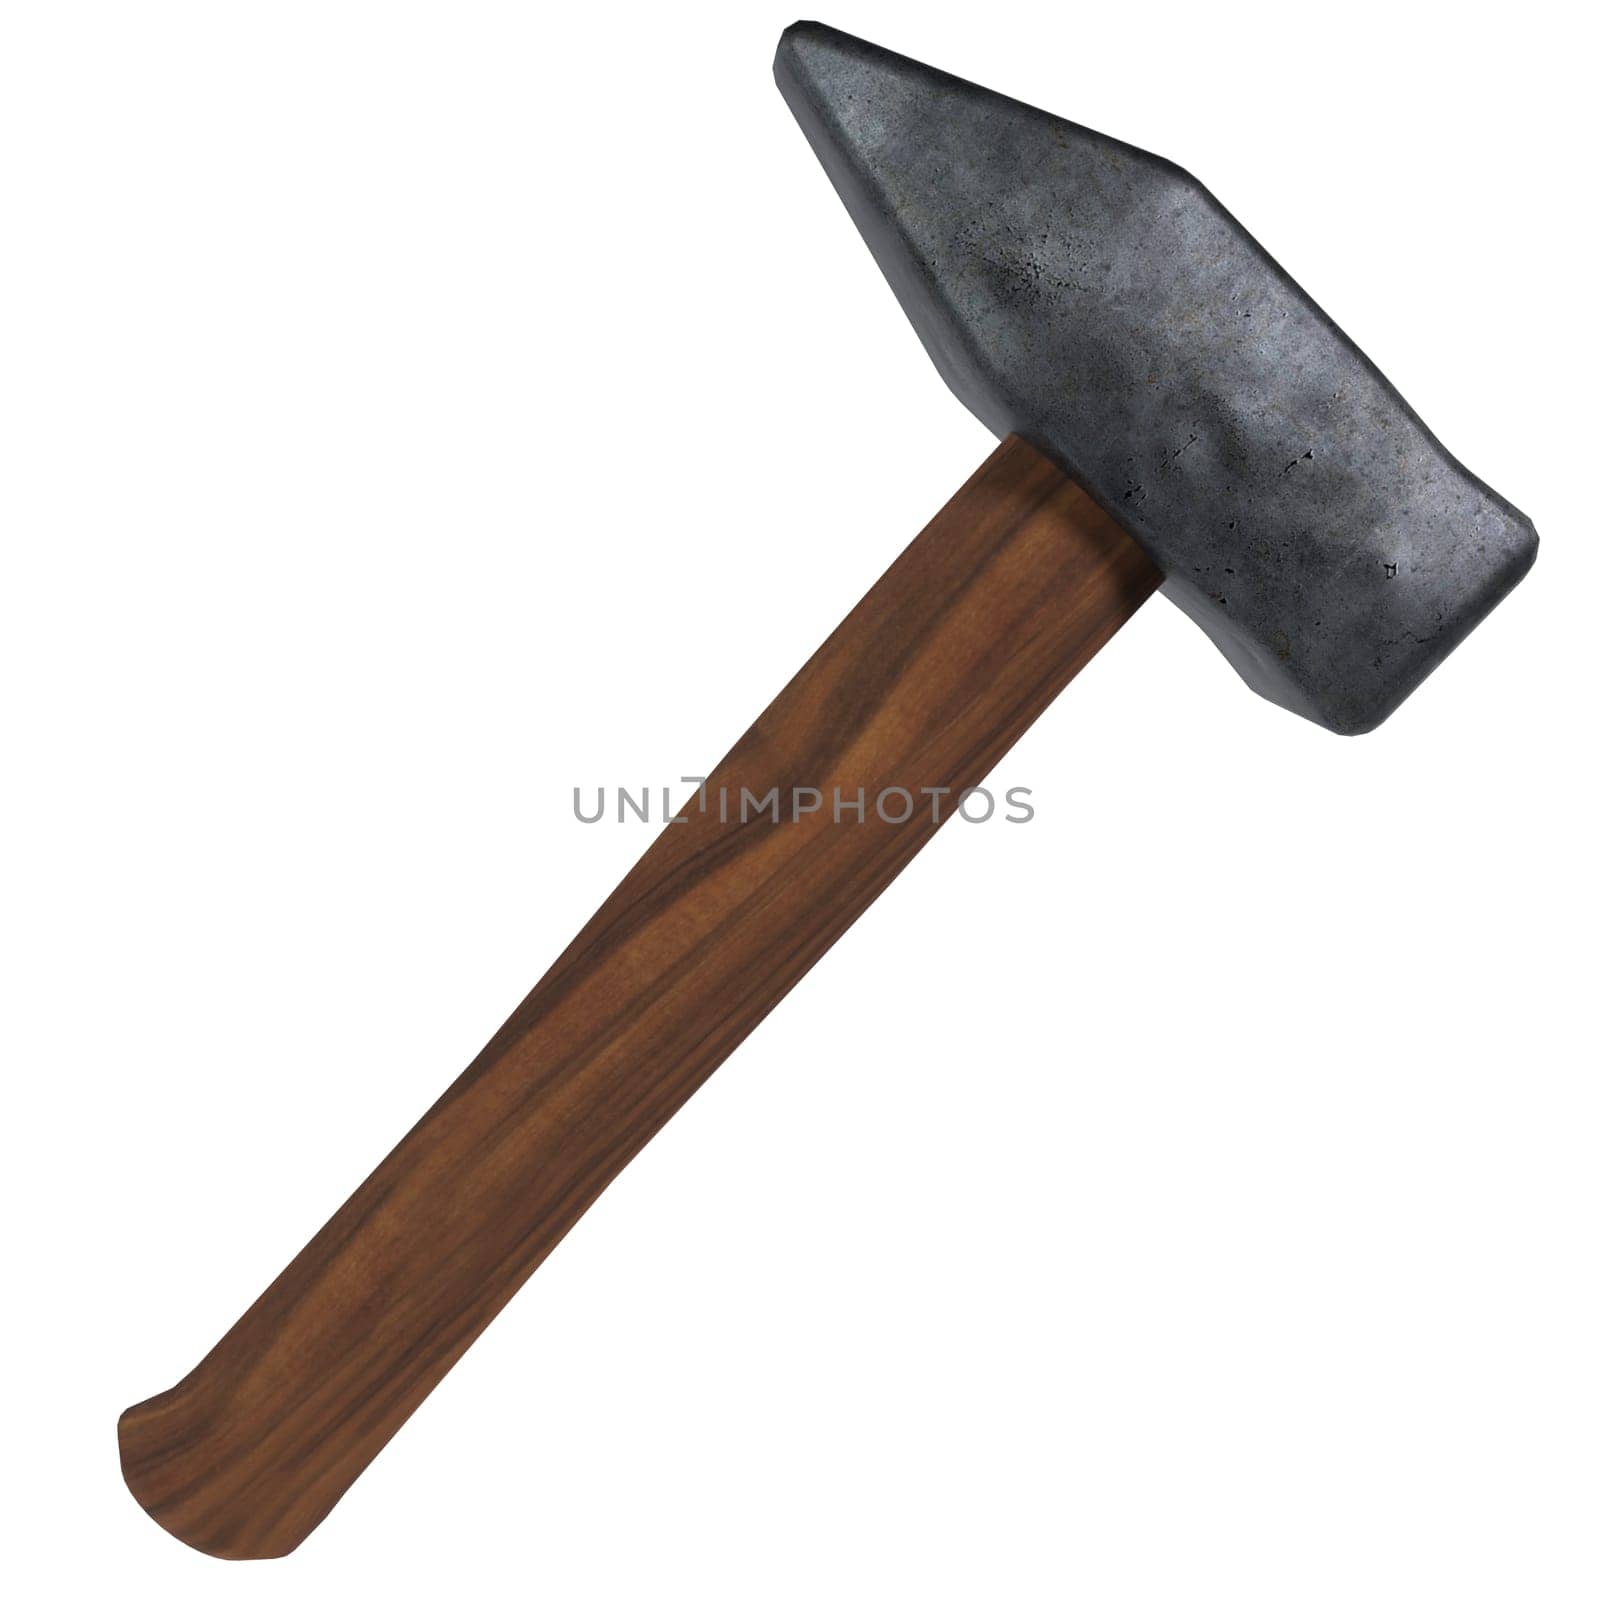 Hammer isolated on white background. High quality 3d illustration